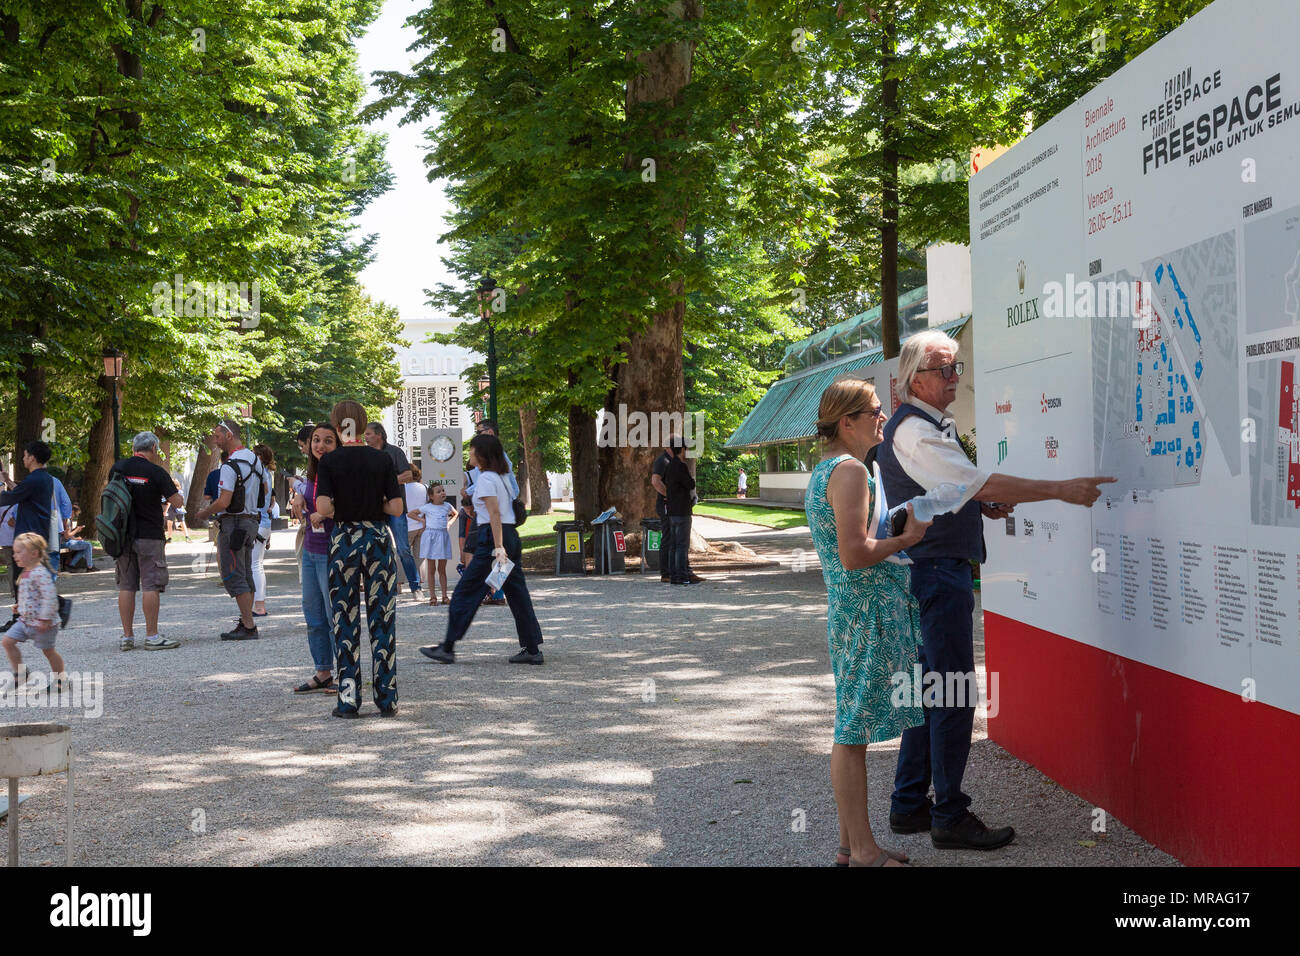 Venice, Veneto, Italy. 26th May 2018. The opening day of the 2018 Architecture  Biennale entitled Freespace in Giardini Pubblici (Public Gardens) Castello. Peopl viewing the information board with the Venice bennale Pavillion visible at the end of the tree-lined avenue. Credit MLCpicsAlamy Live News Stock Photo